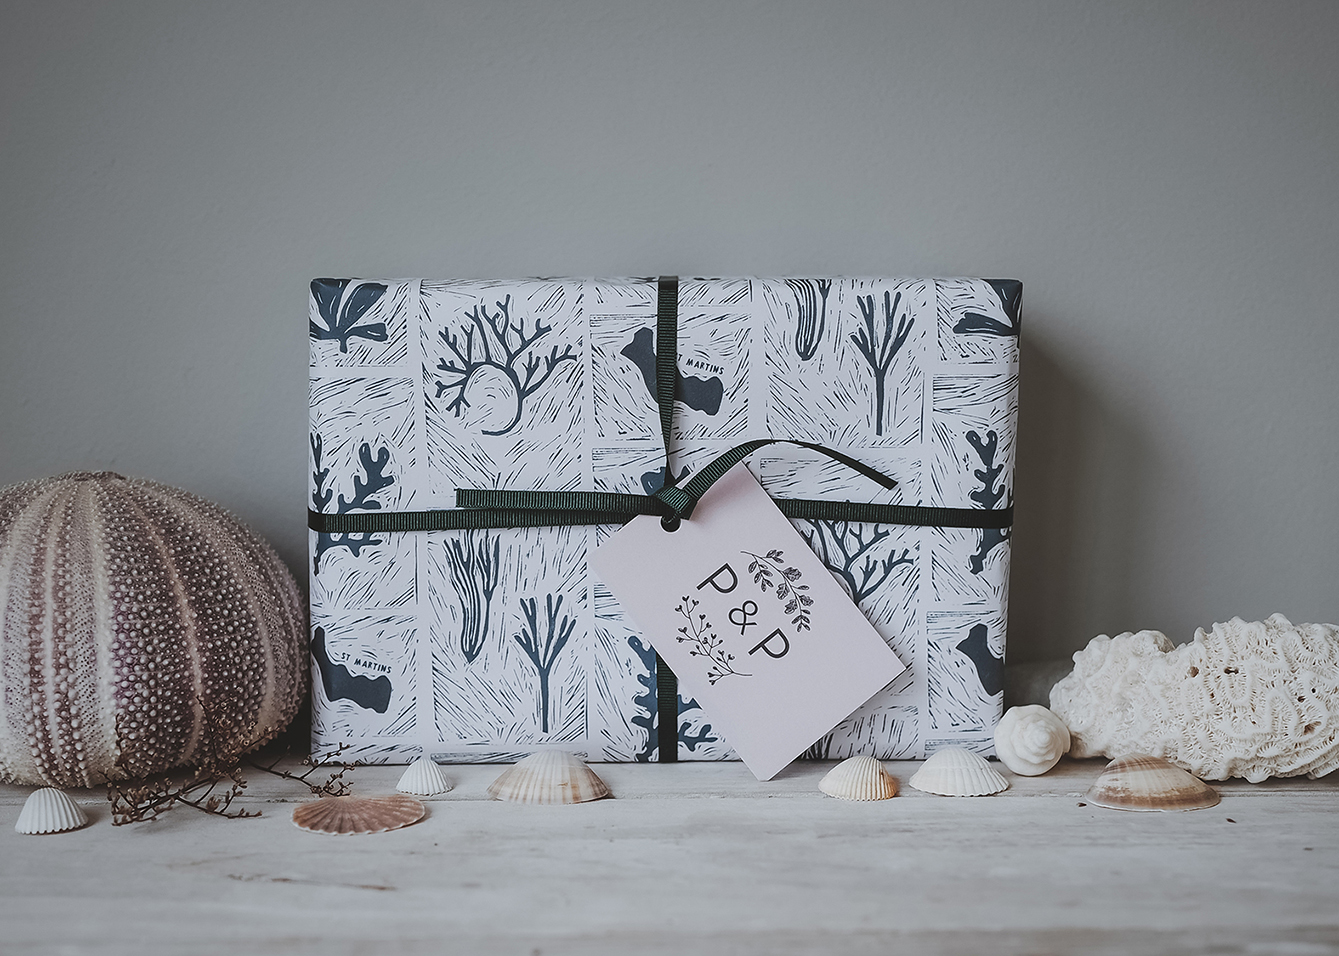 Gift Wrap by Phoenix and Providence - Sustainable Gift Guide by Curly Carrot Pinterest Marketing